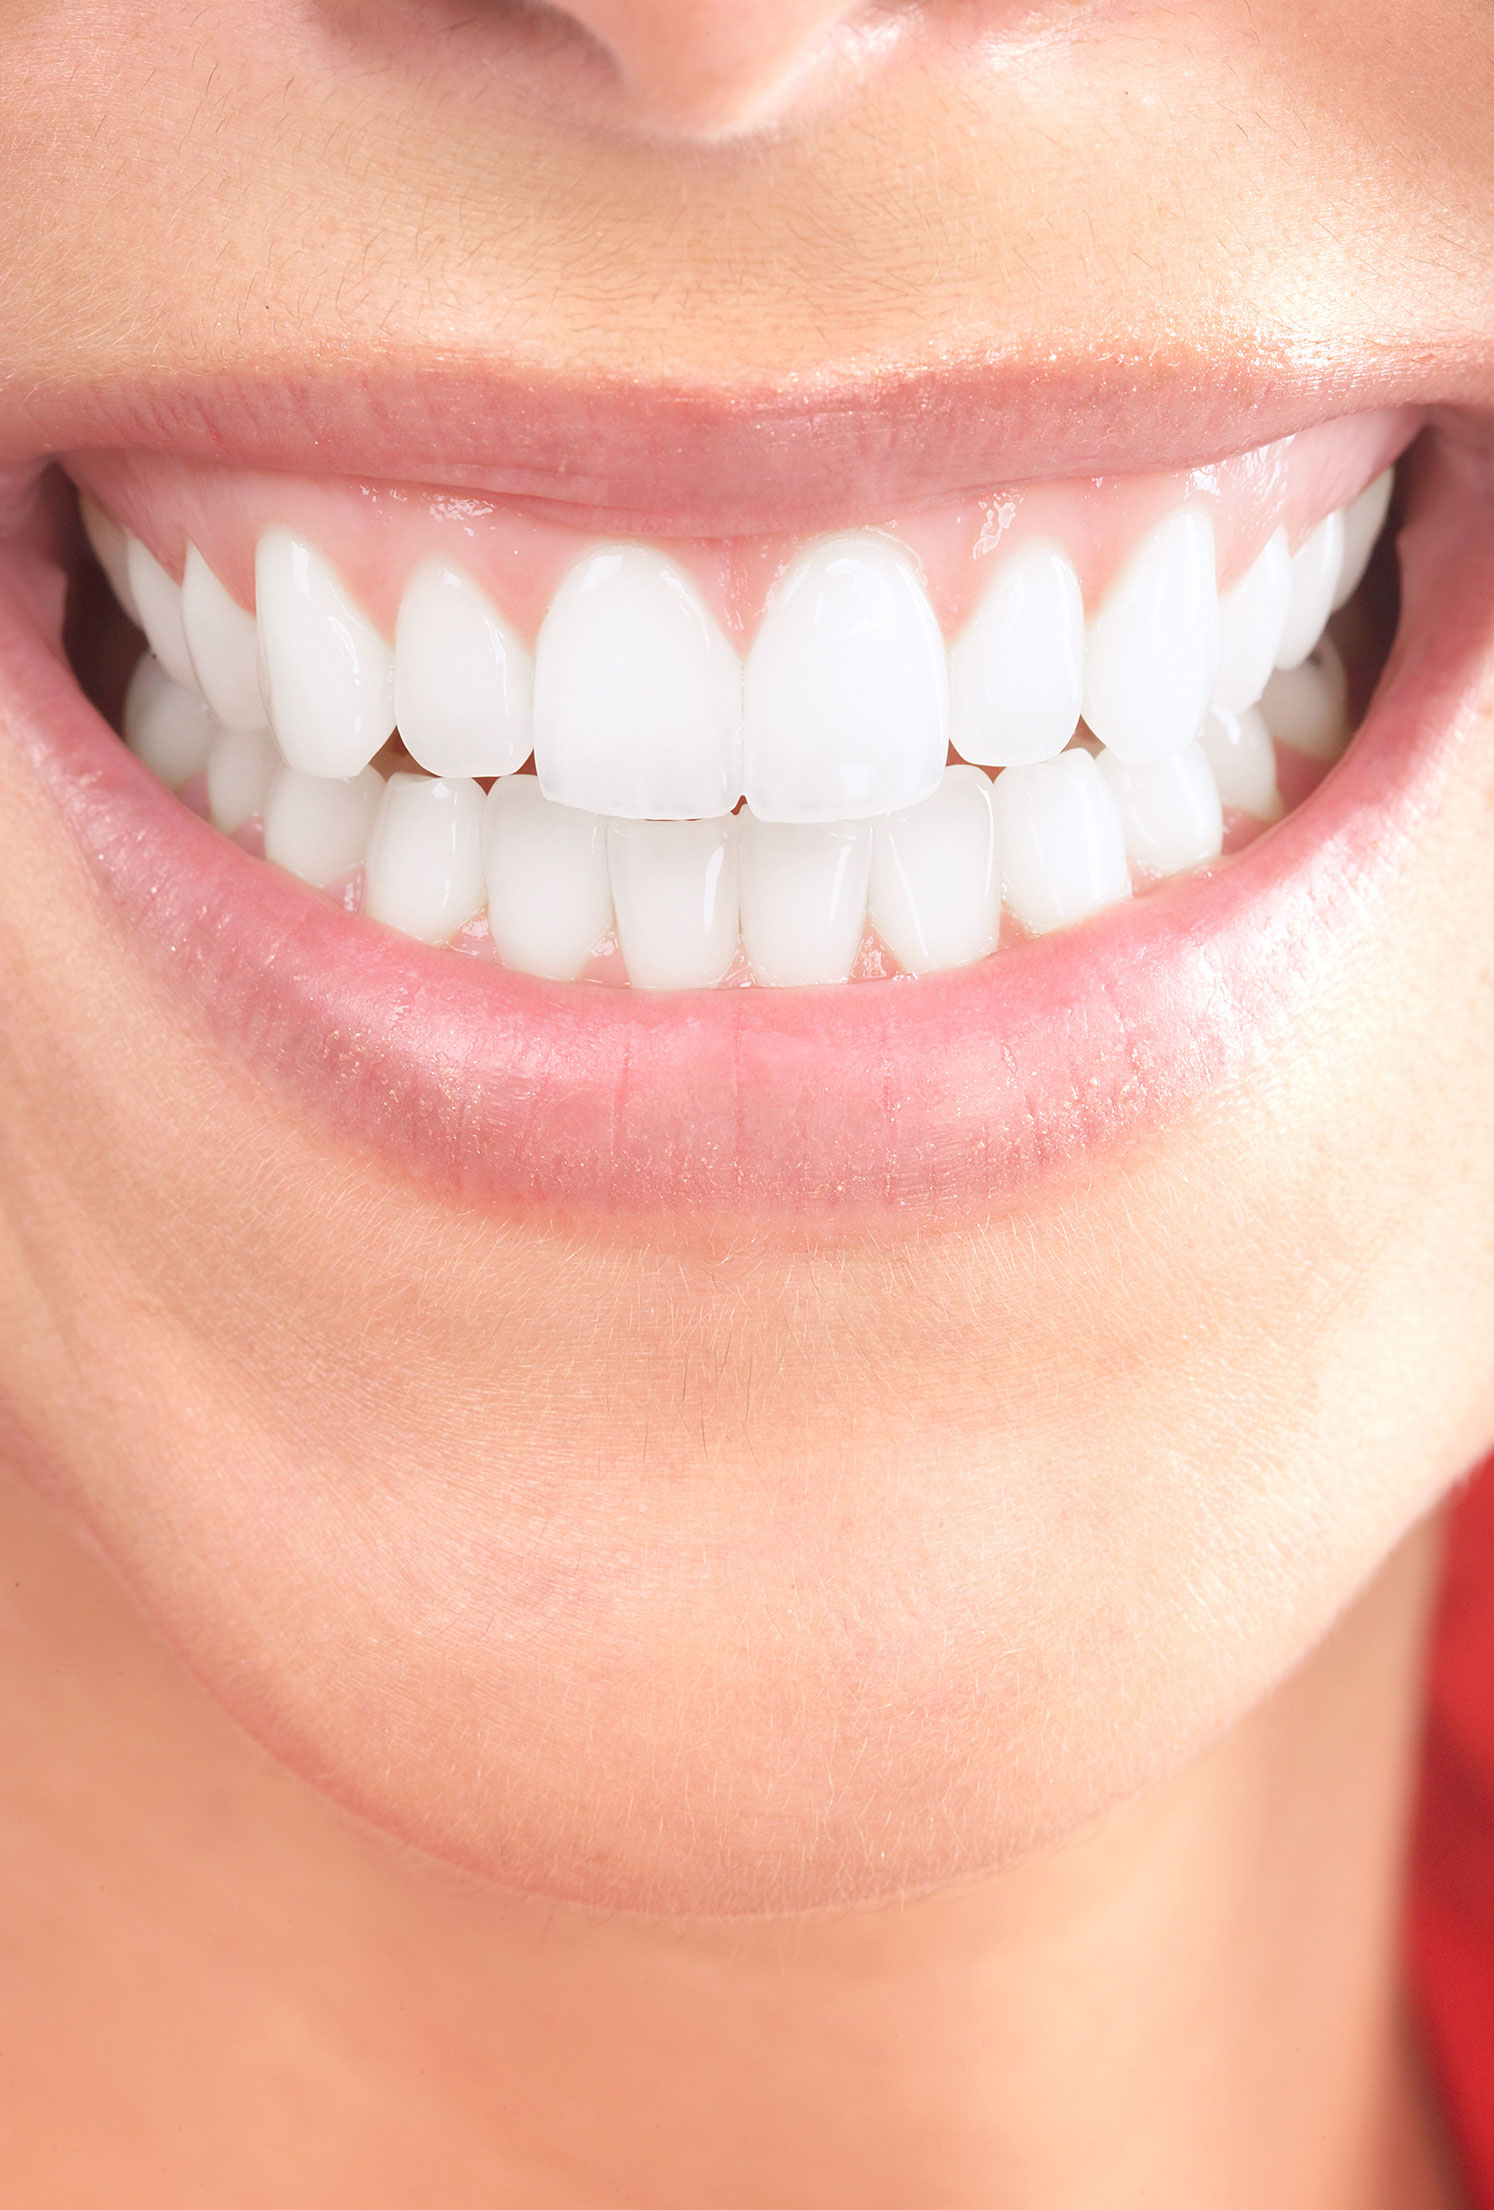 https://www.expressionsdental.co.uk/wp-content/uploads/2022/09/tooth-whitening.jpg